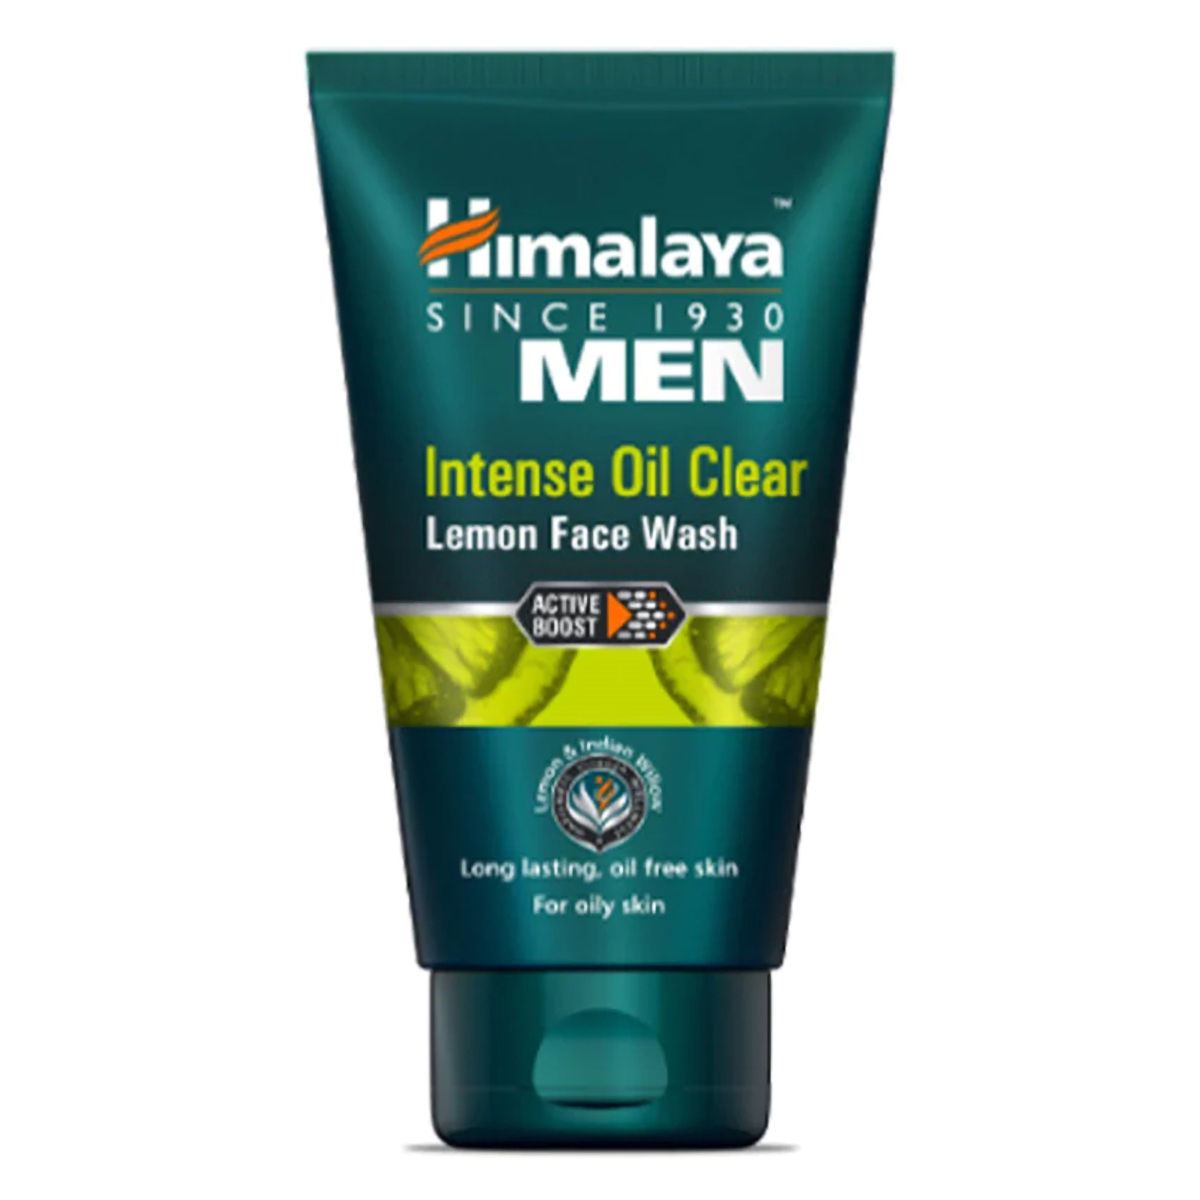 Buy Himalaya Men Intense Oil Clear Lemon Face Wash 50 ml | Lemon & Indian Willow | Removes Excess Oil | Refreshes Skin | Active Boost Technology | For Men | For Oily Skin Online